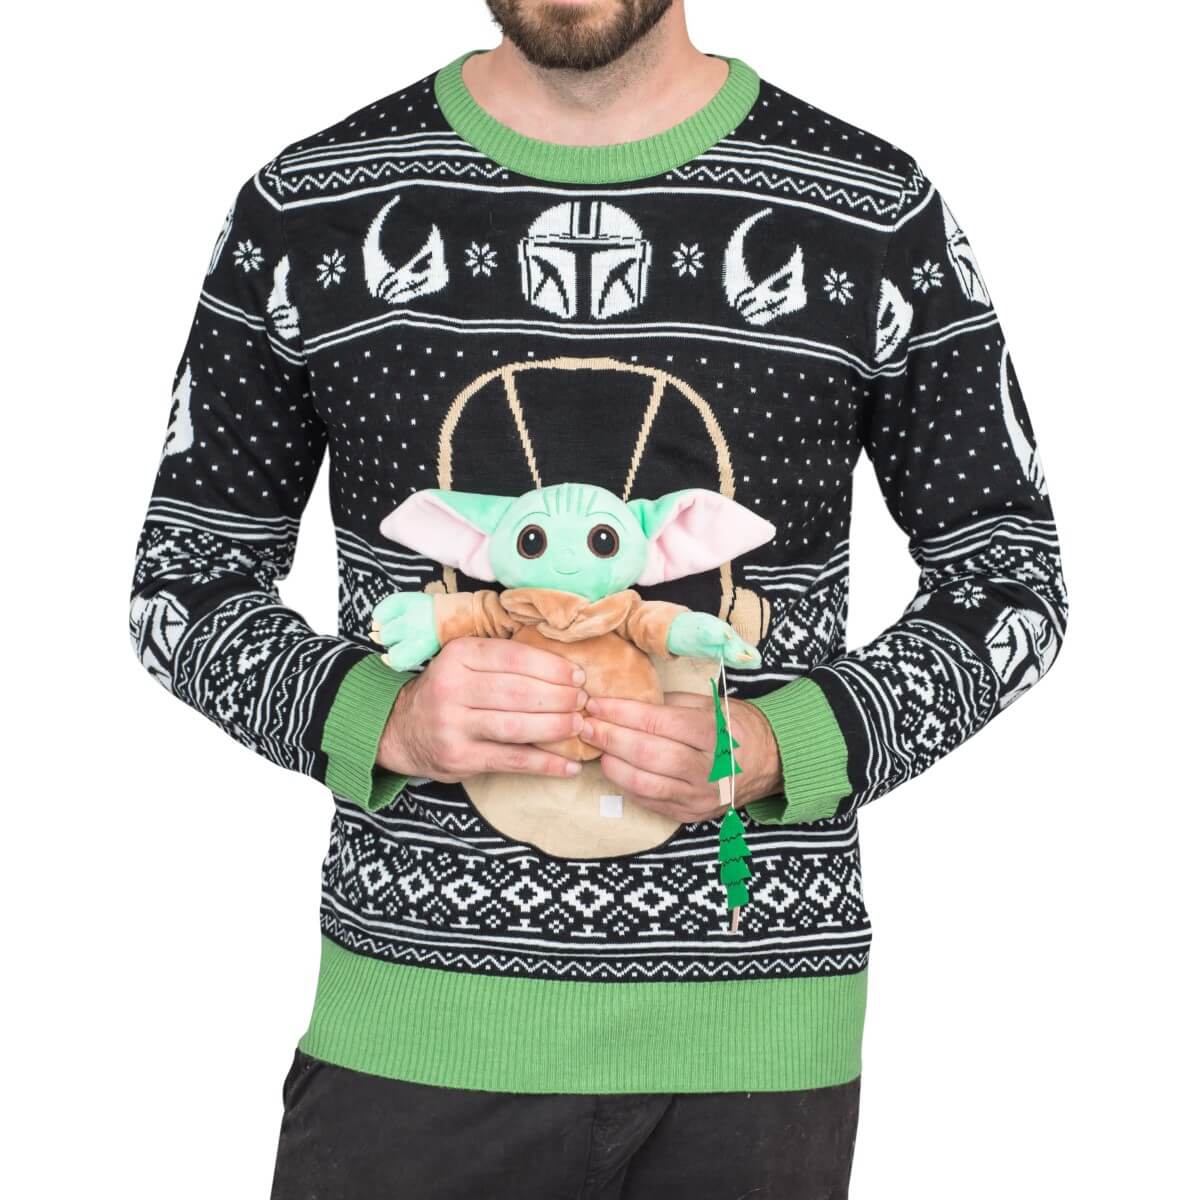 Star Wars Baby Yoda The Child Forces Trees Ugly Christmas Sweater-1